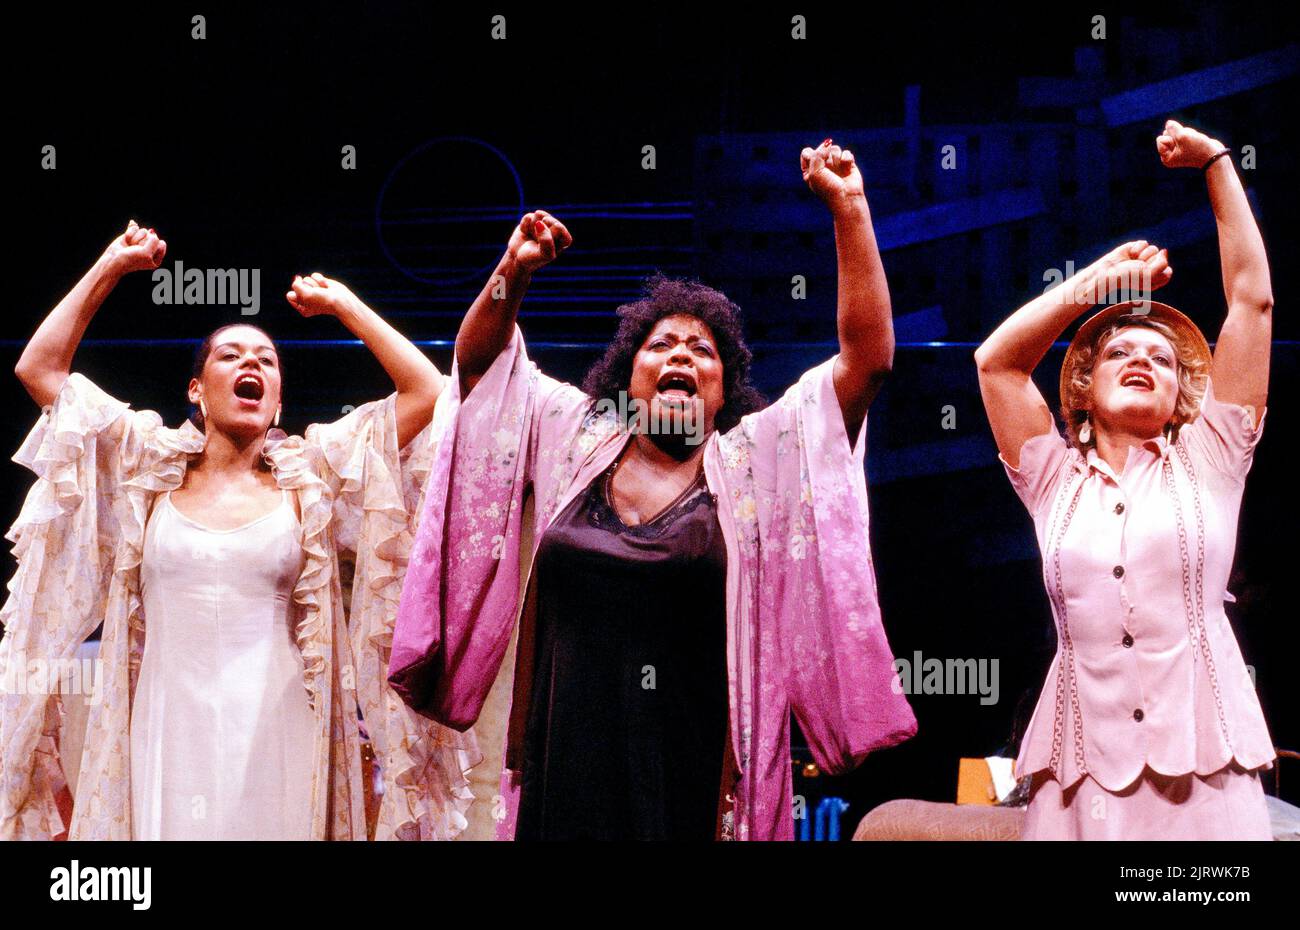 l-r: Debby Bishop, Carol Woods, Maria Friedman in BLUES IN THE NIGHT at the Donmar Warehouse, London WC2  12/06/1987  conceived & originally directed by Sheldon Epps  design: Michael Pavelka  lighting: Kevin Sleep  staging: Steve Whatley Stock Photo